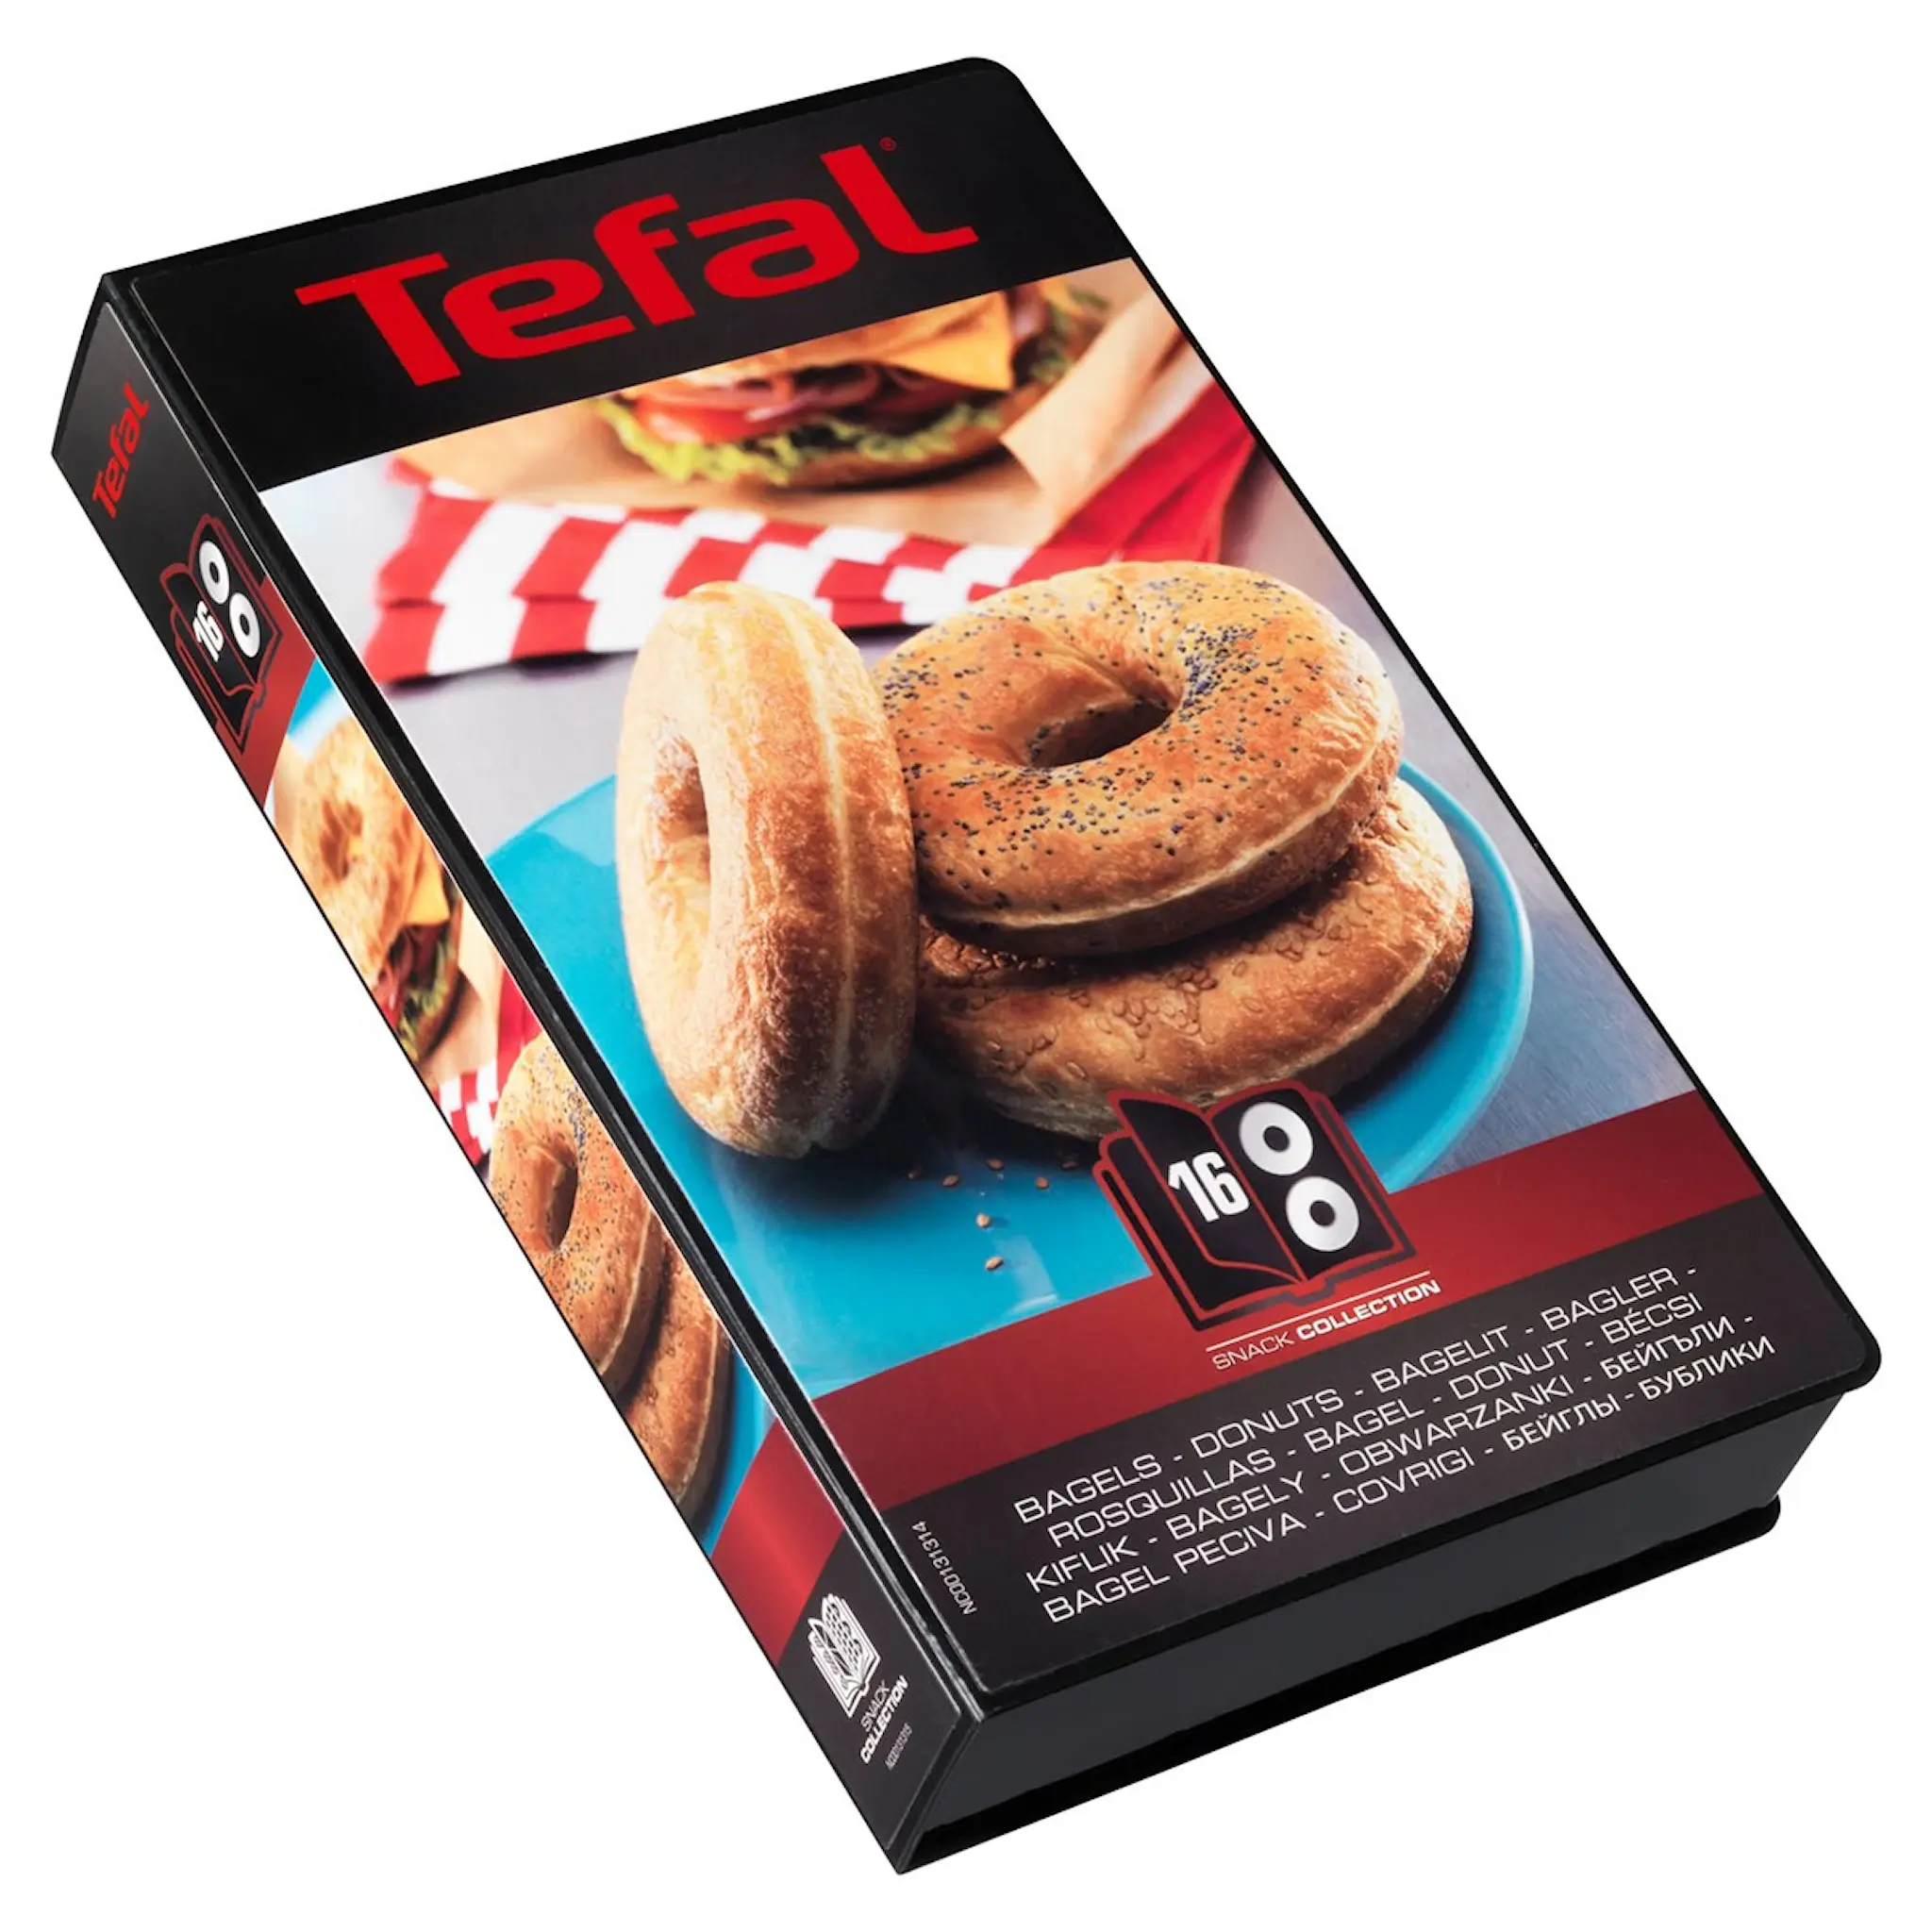 Tefal Tefal Snack Collection Paistolevyt: 16 Bagelit